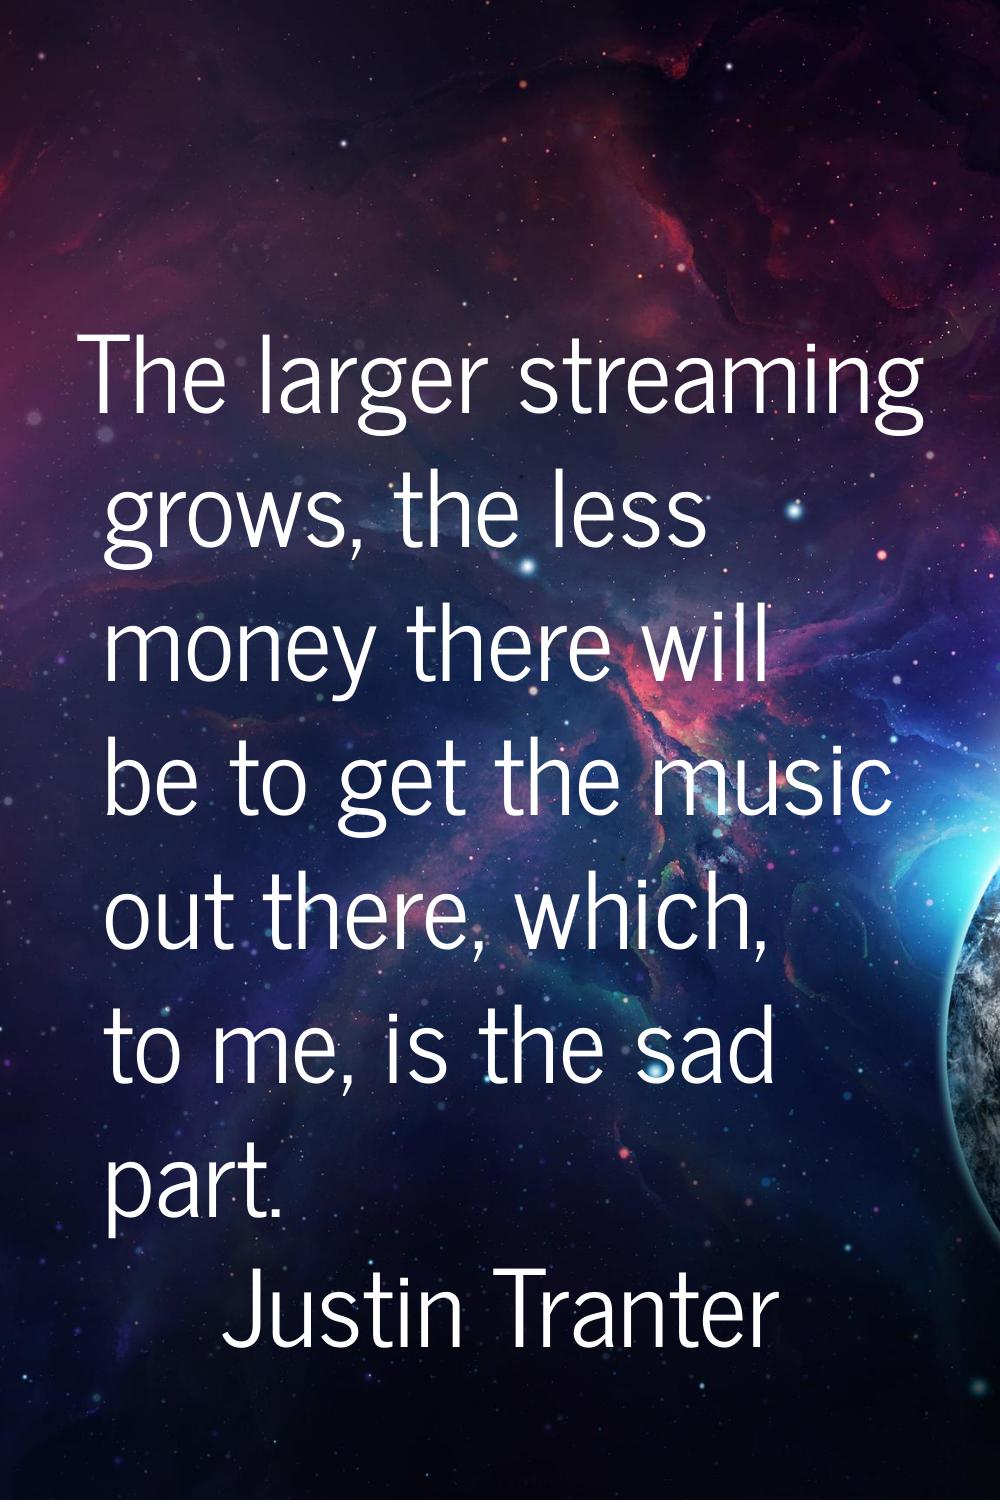 The larger streaming grows, the less money there will be to get the music out there, which, to me, 